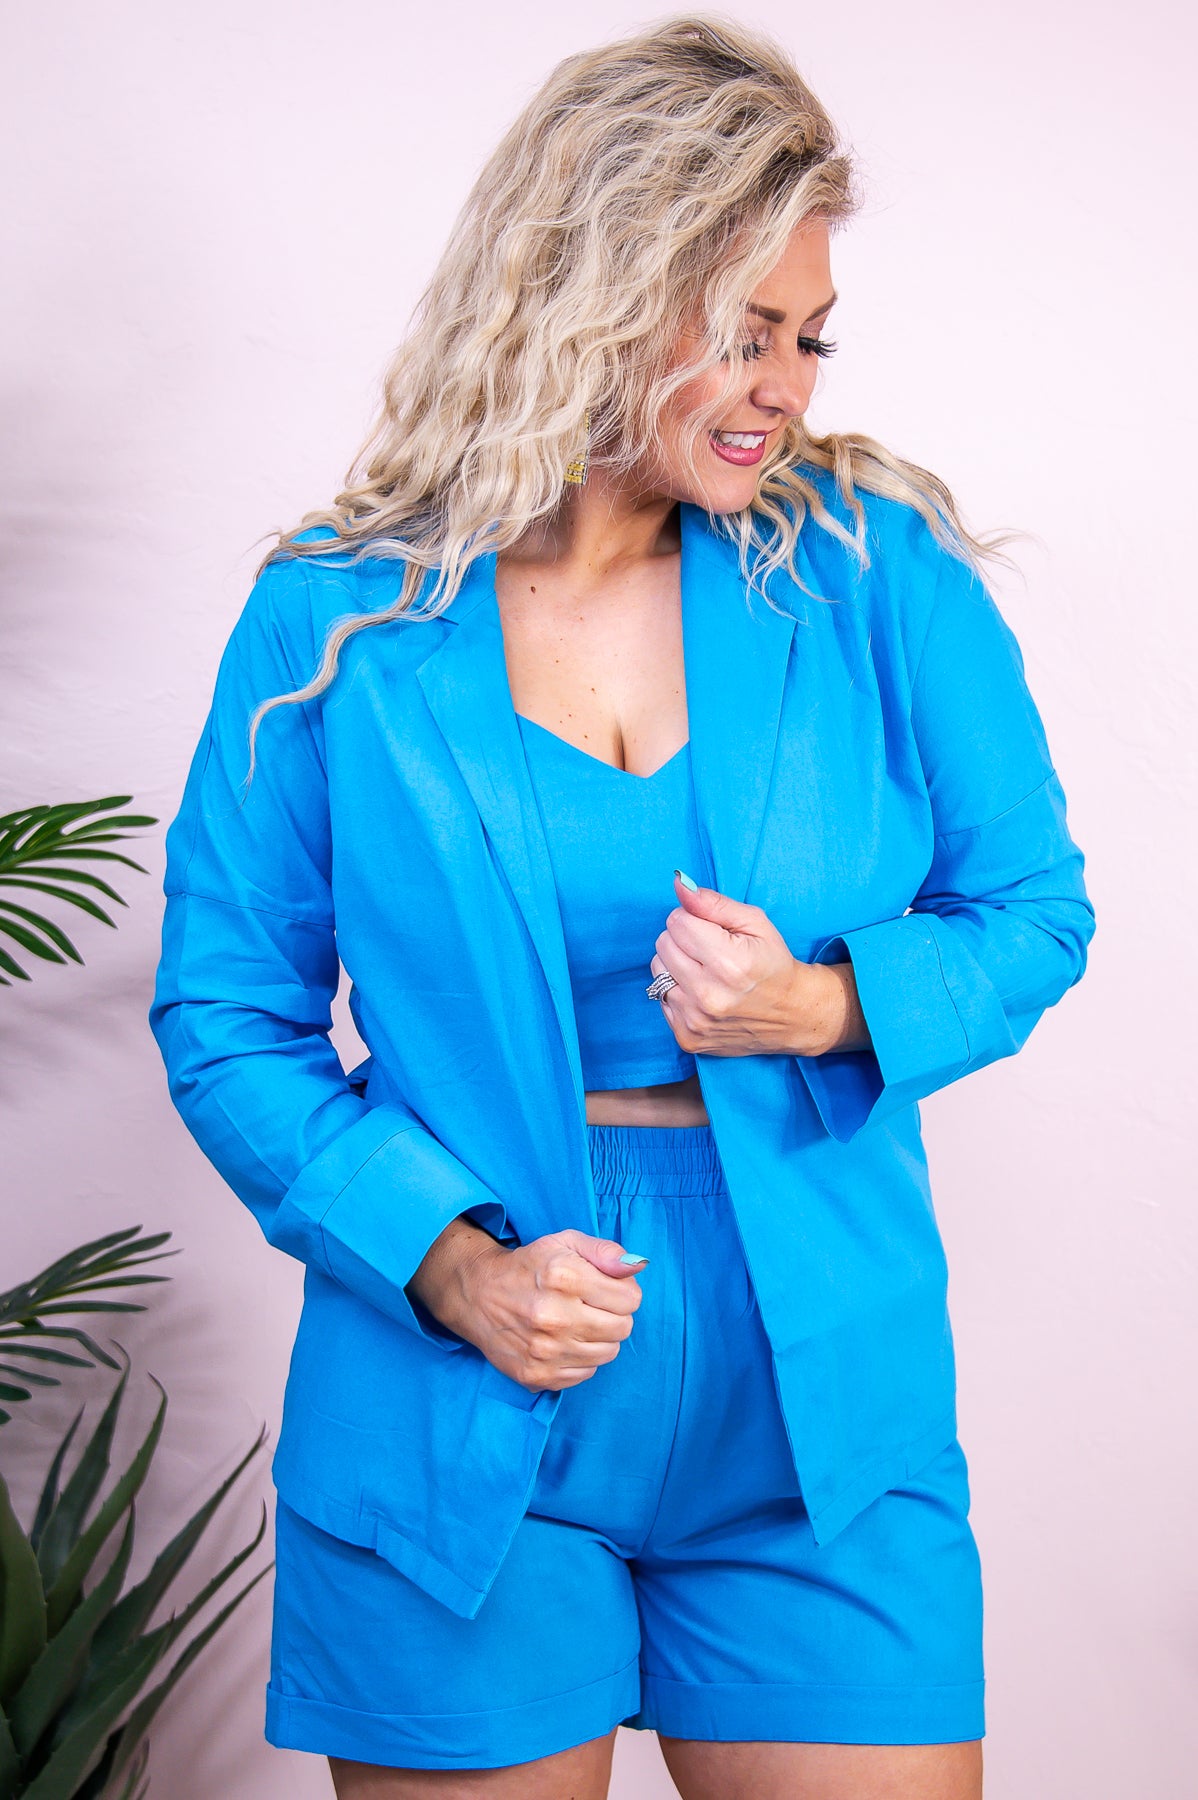 Sure Feels Right Blue Solid Cropped Top/Blazer/Short (3-Piece Set) - T9549BL